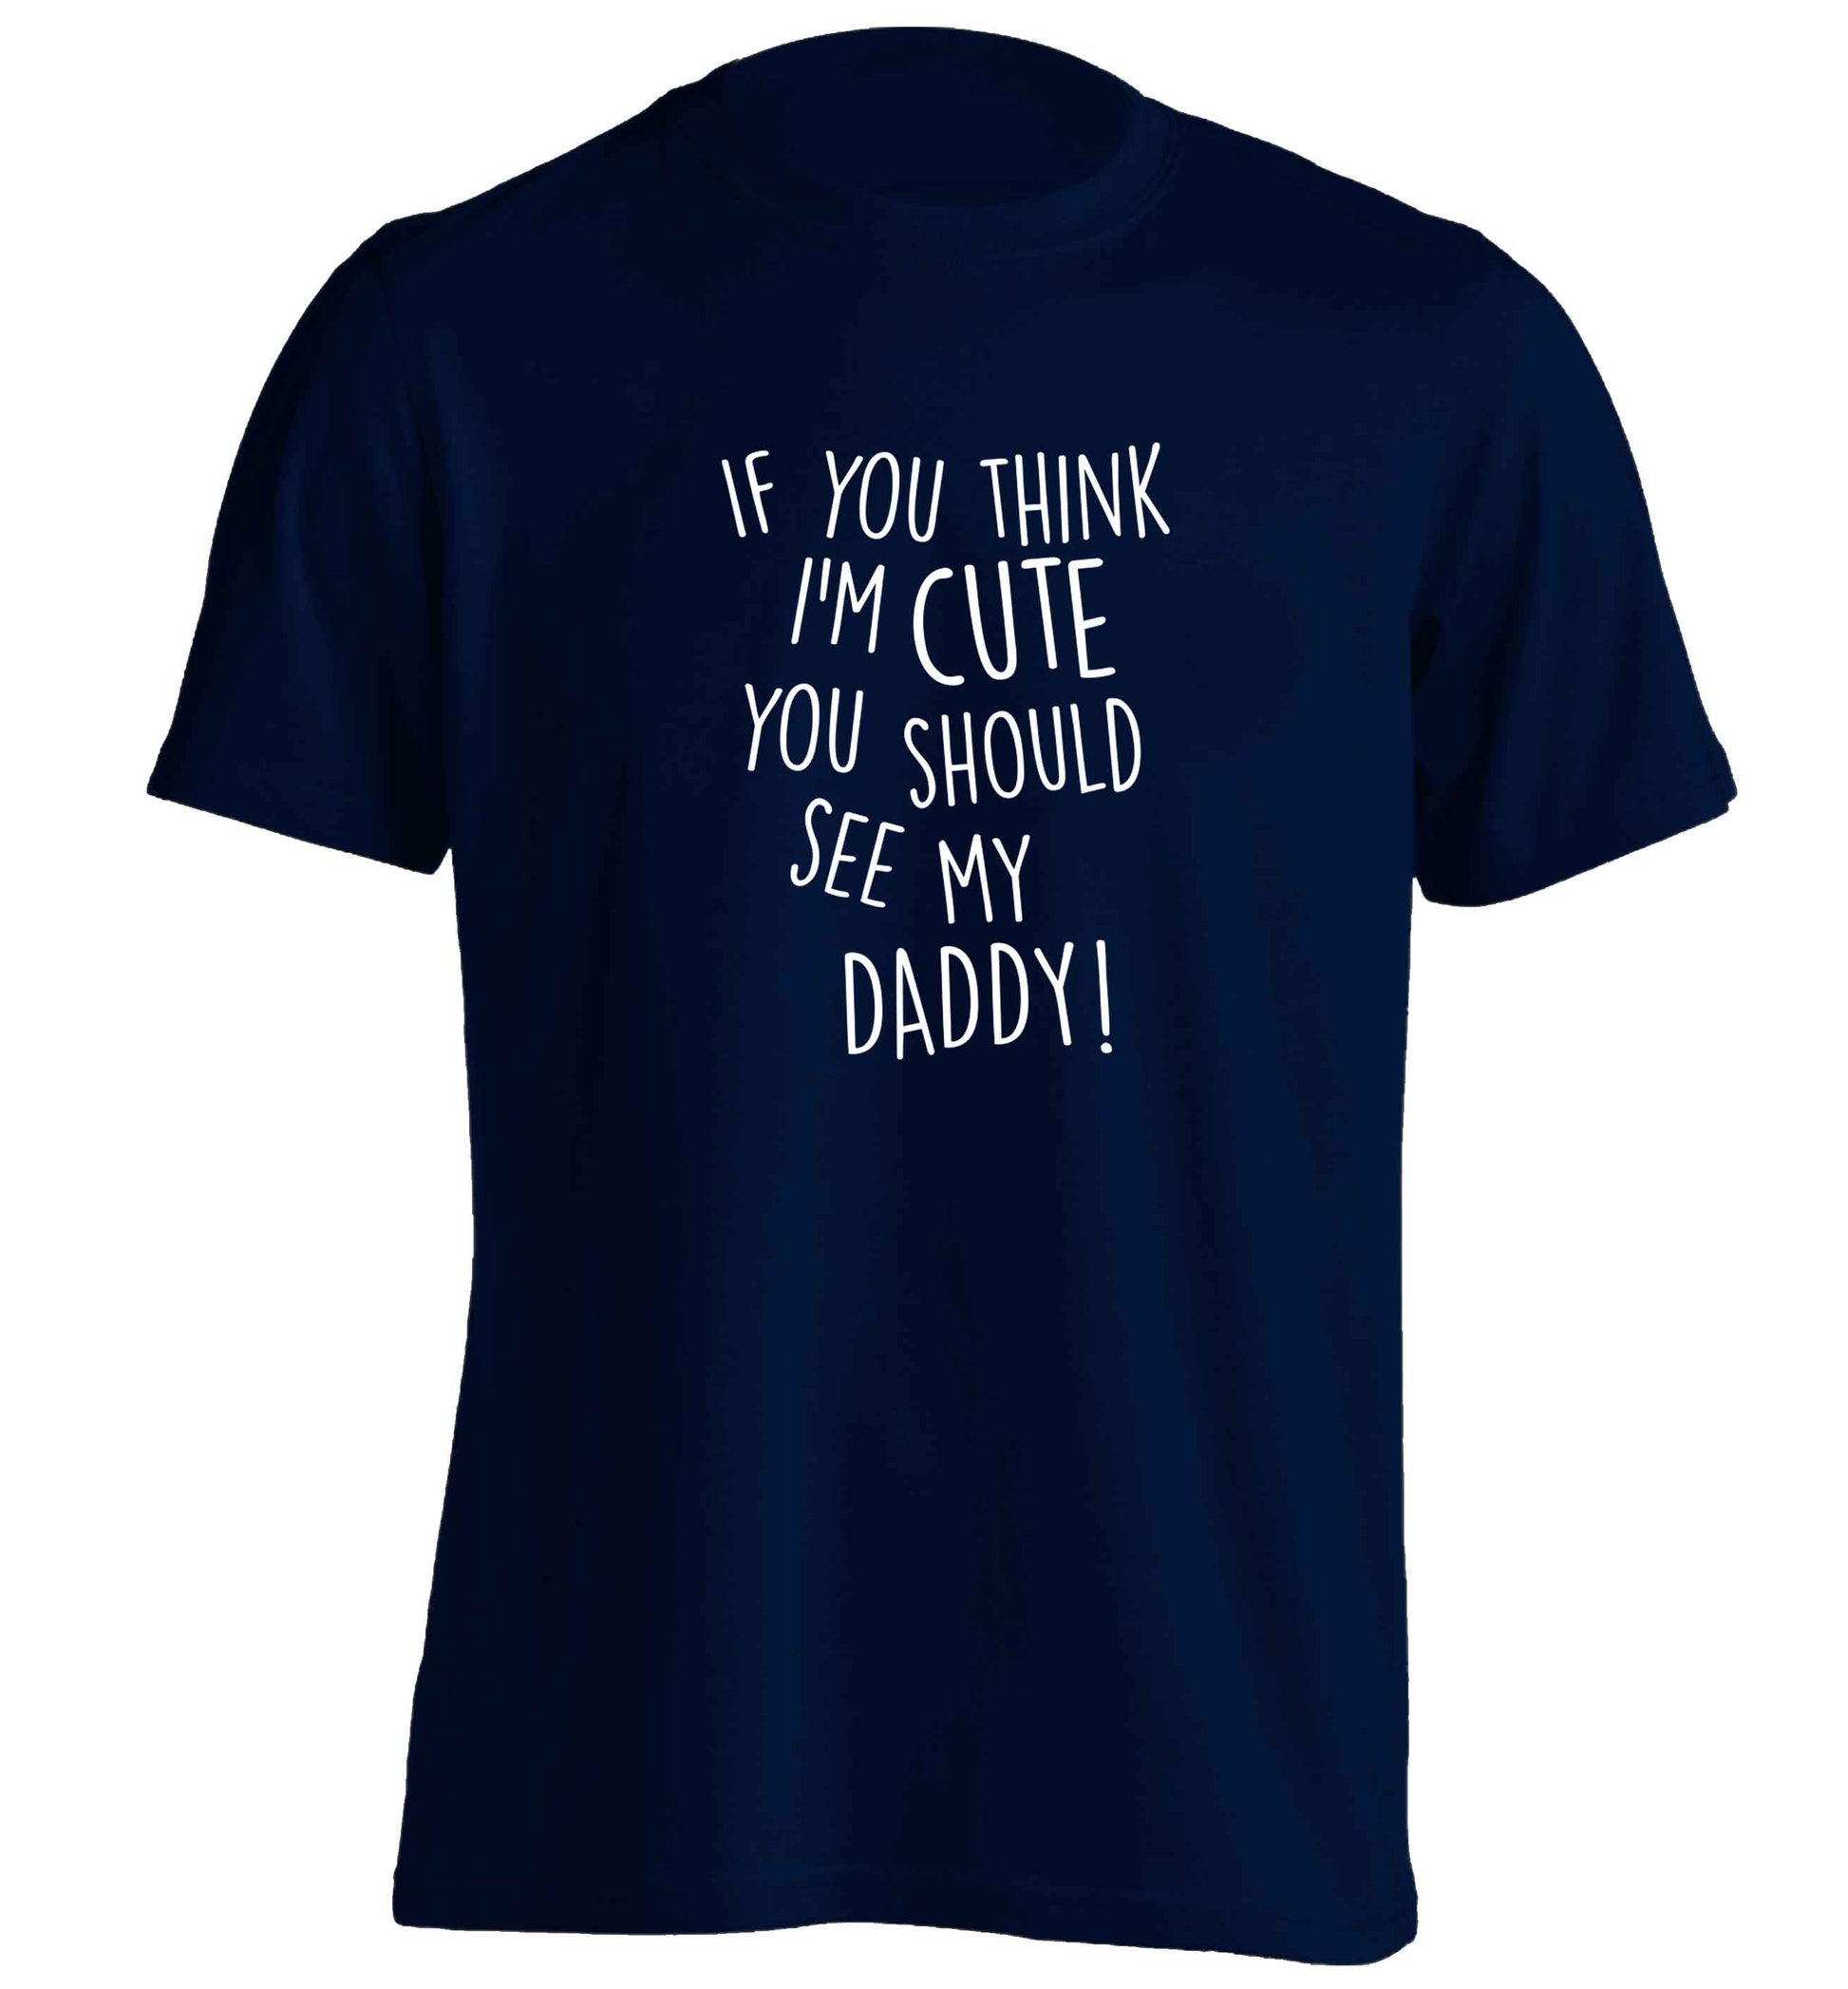 If you think I'm cute you should see my daddy adults unisex navy Tshirt 2XL